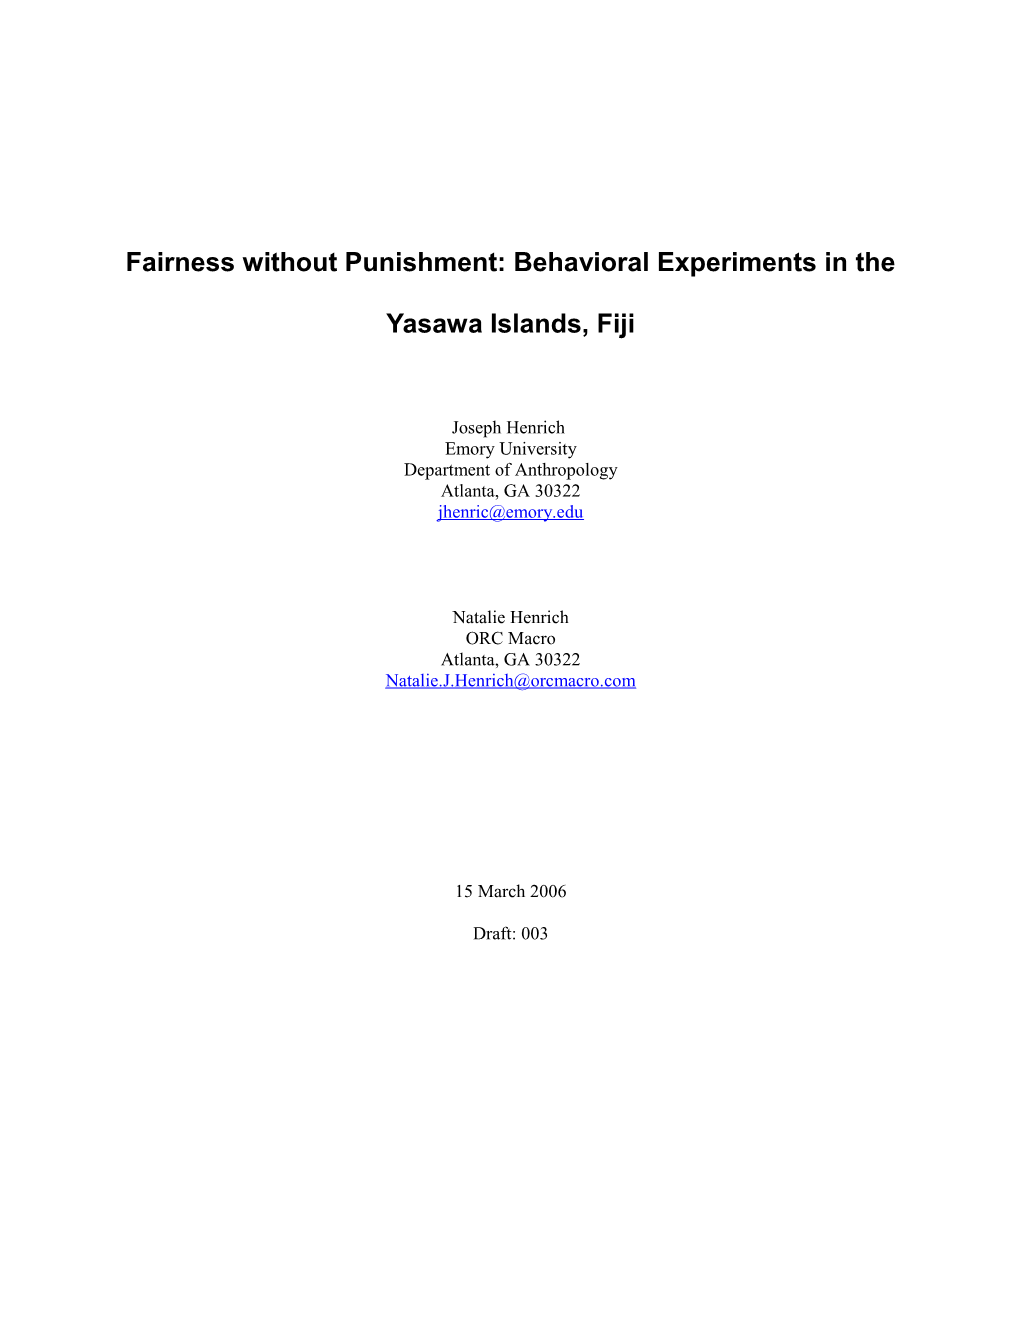 Fairness Without Punishment: Behavioral Experiments in the Yasawa Islands, Fiji